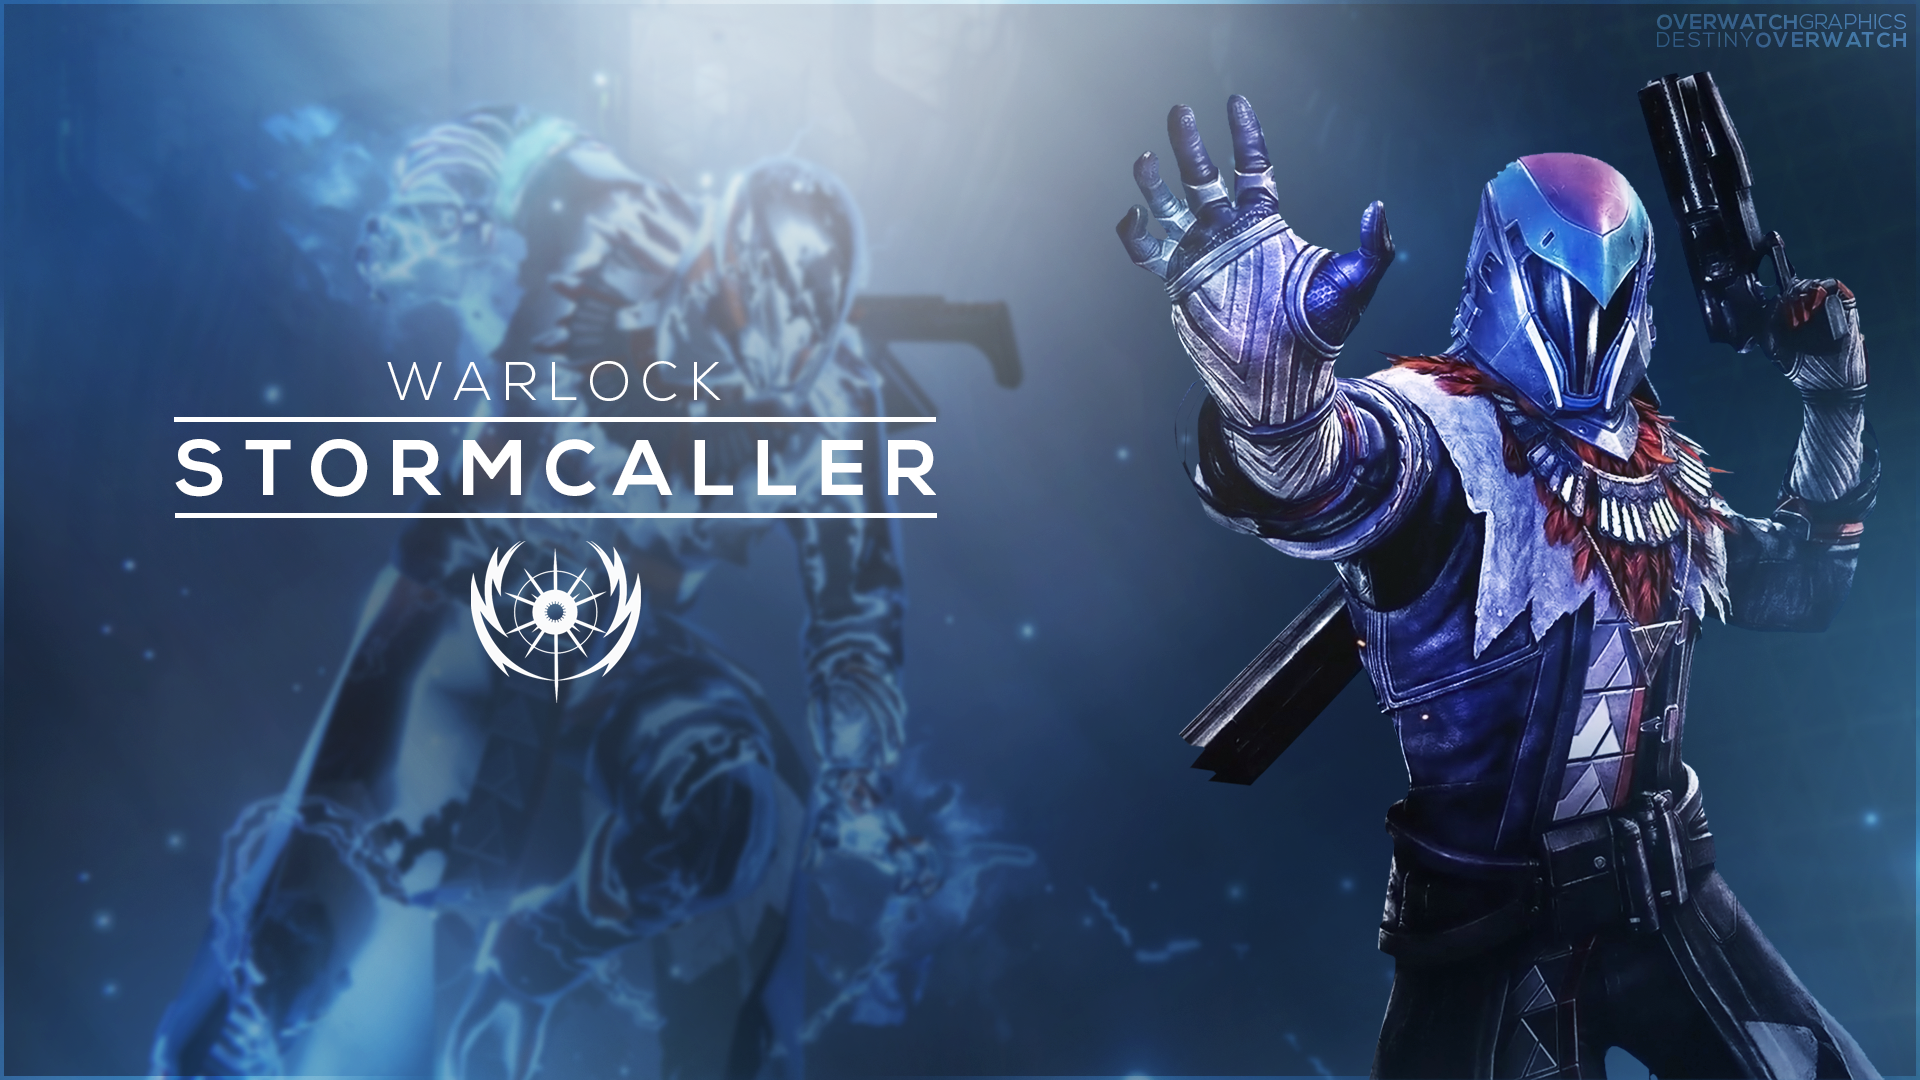 Destiny the Game   Stormcaller Phone Wallpaper by OverwatchGraphics on